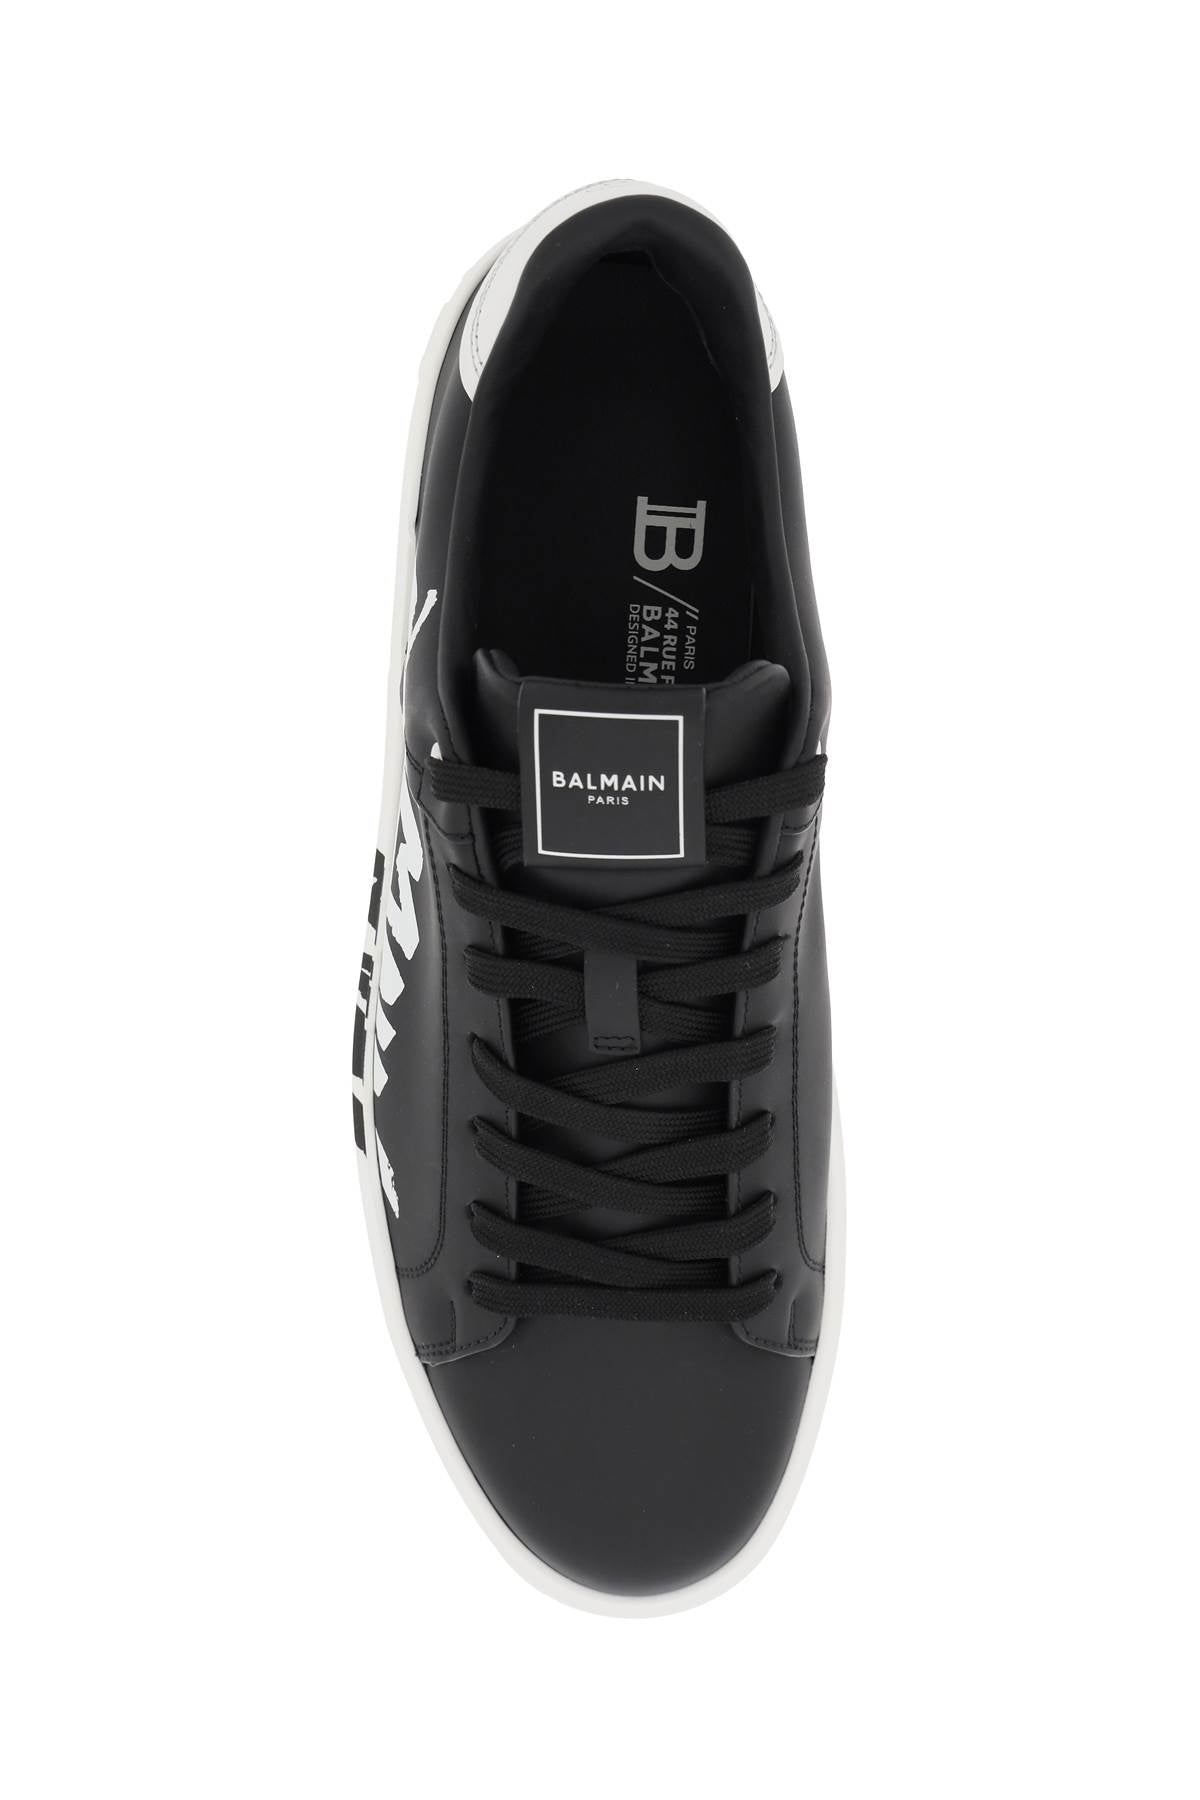 Balmain leather 'b-court' sneakers with logo print